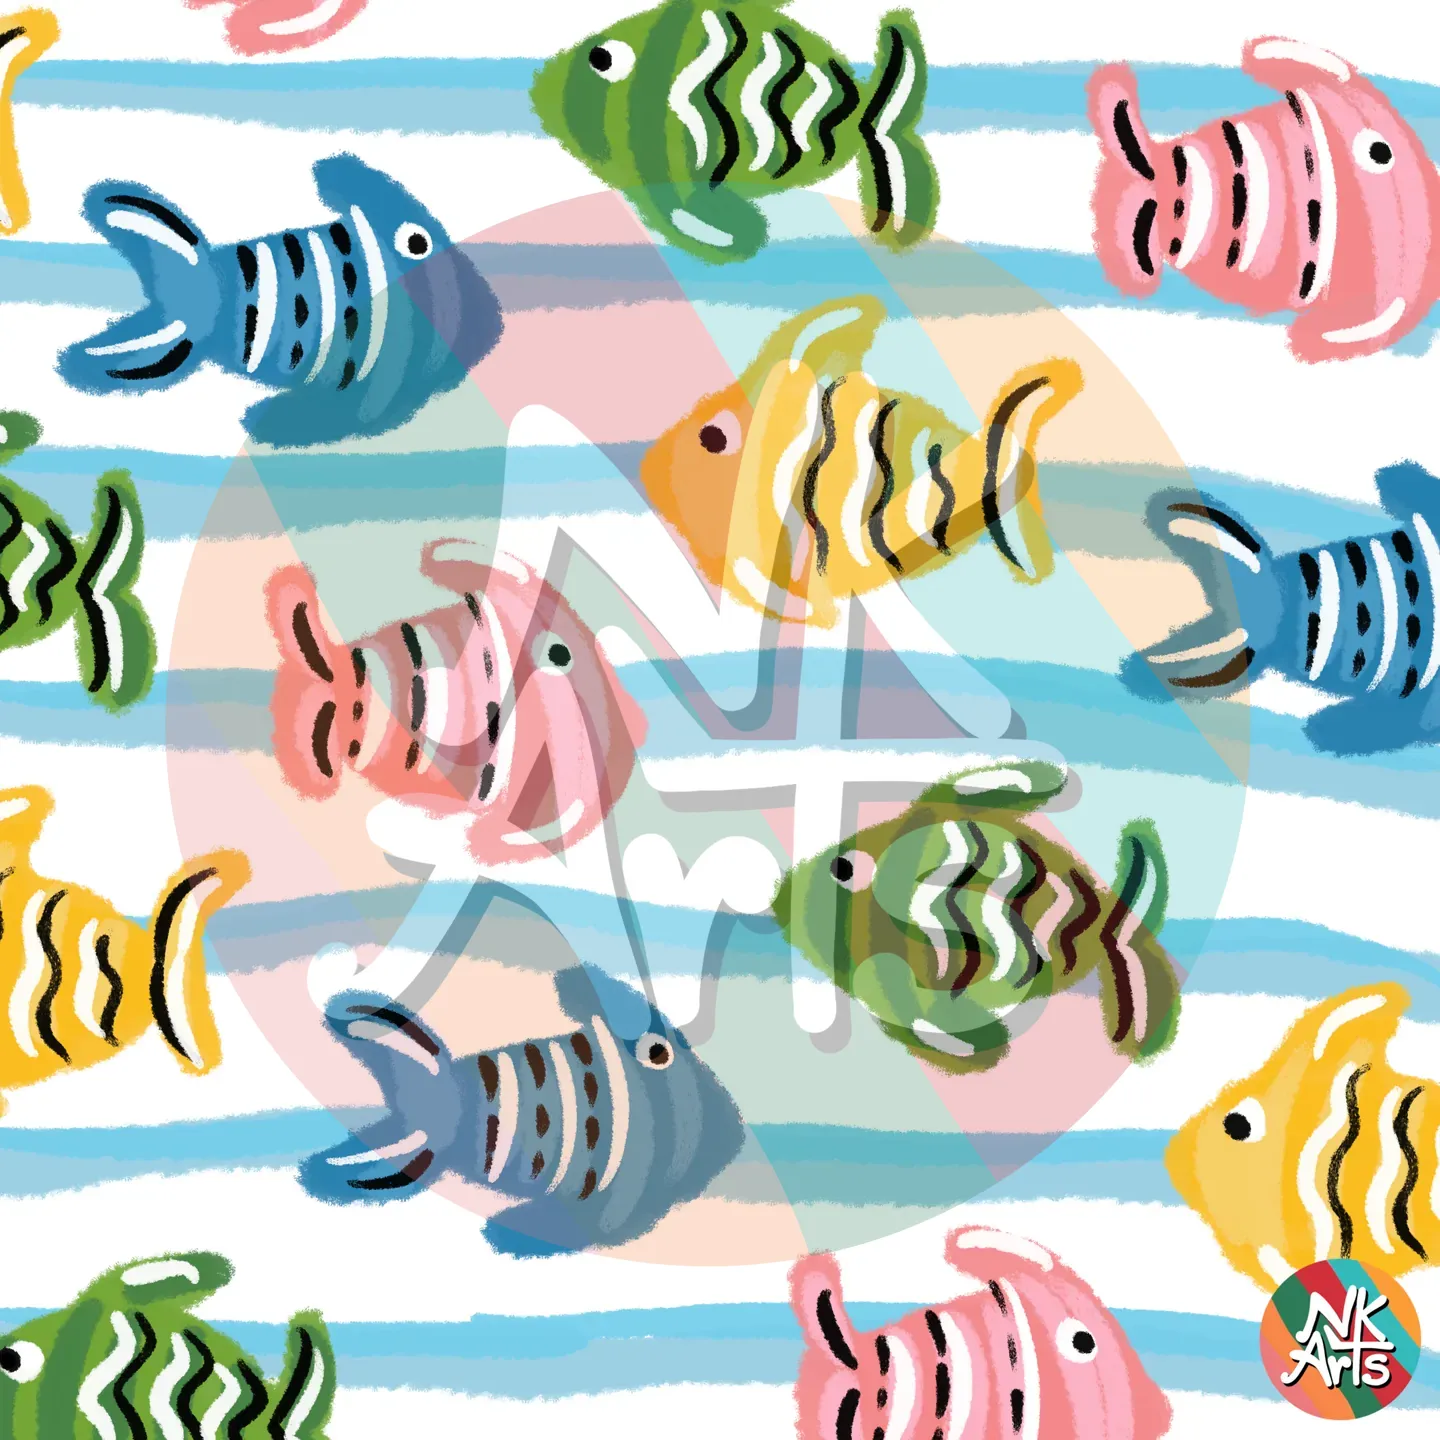 Colourful fishes